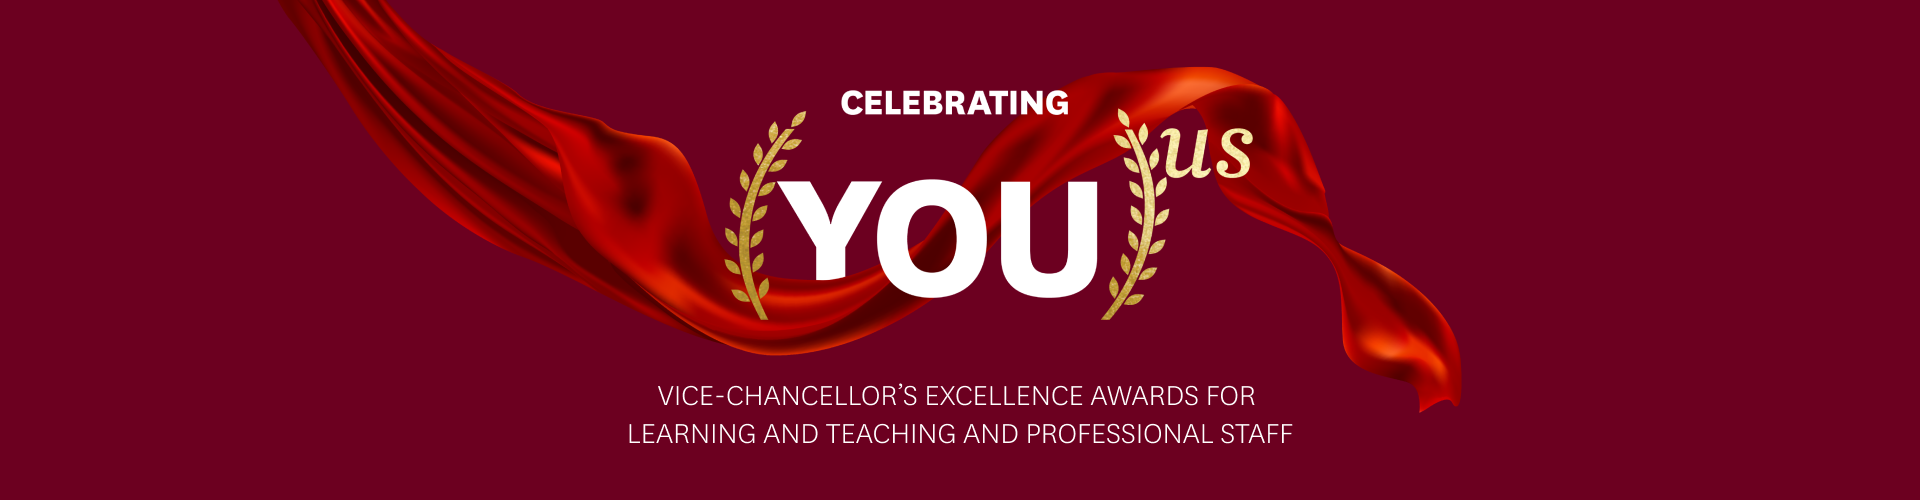 Vice-Chancellor's Excellence Awards for Learning and Teaching and Professional Staff